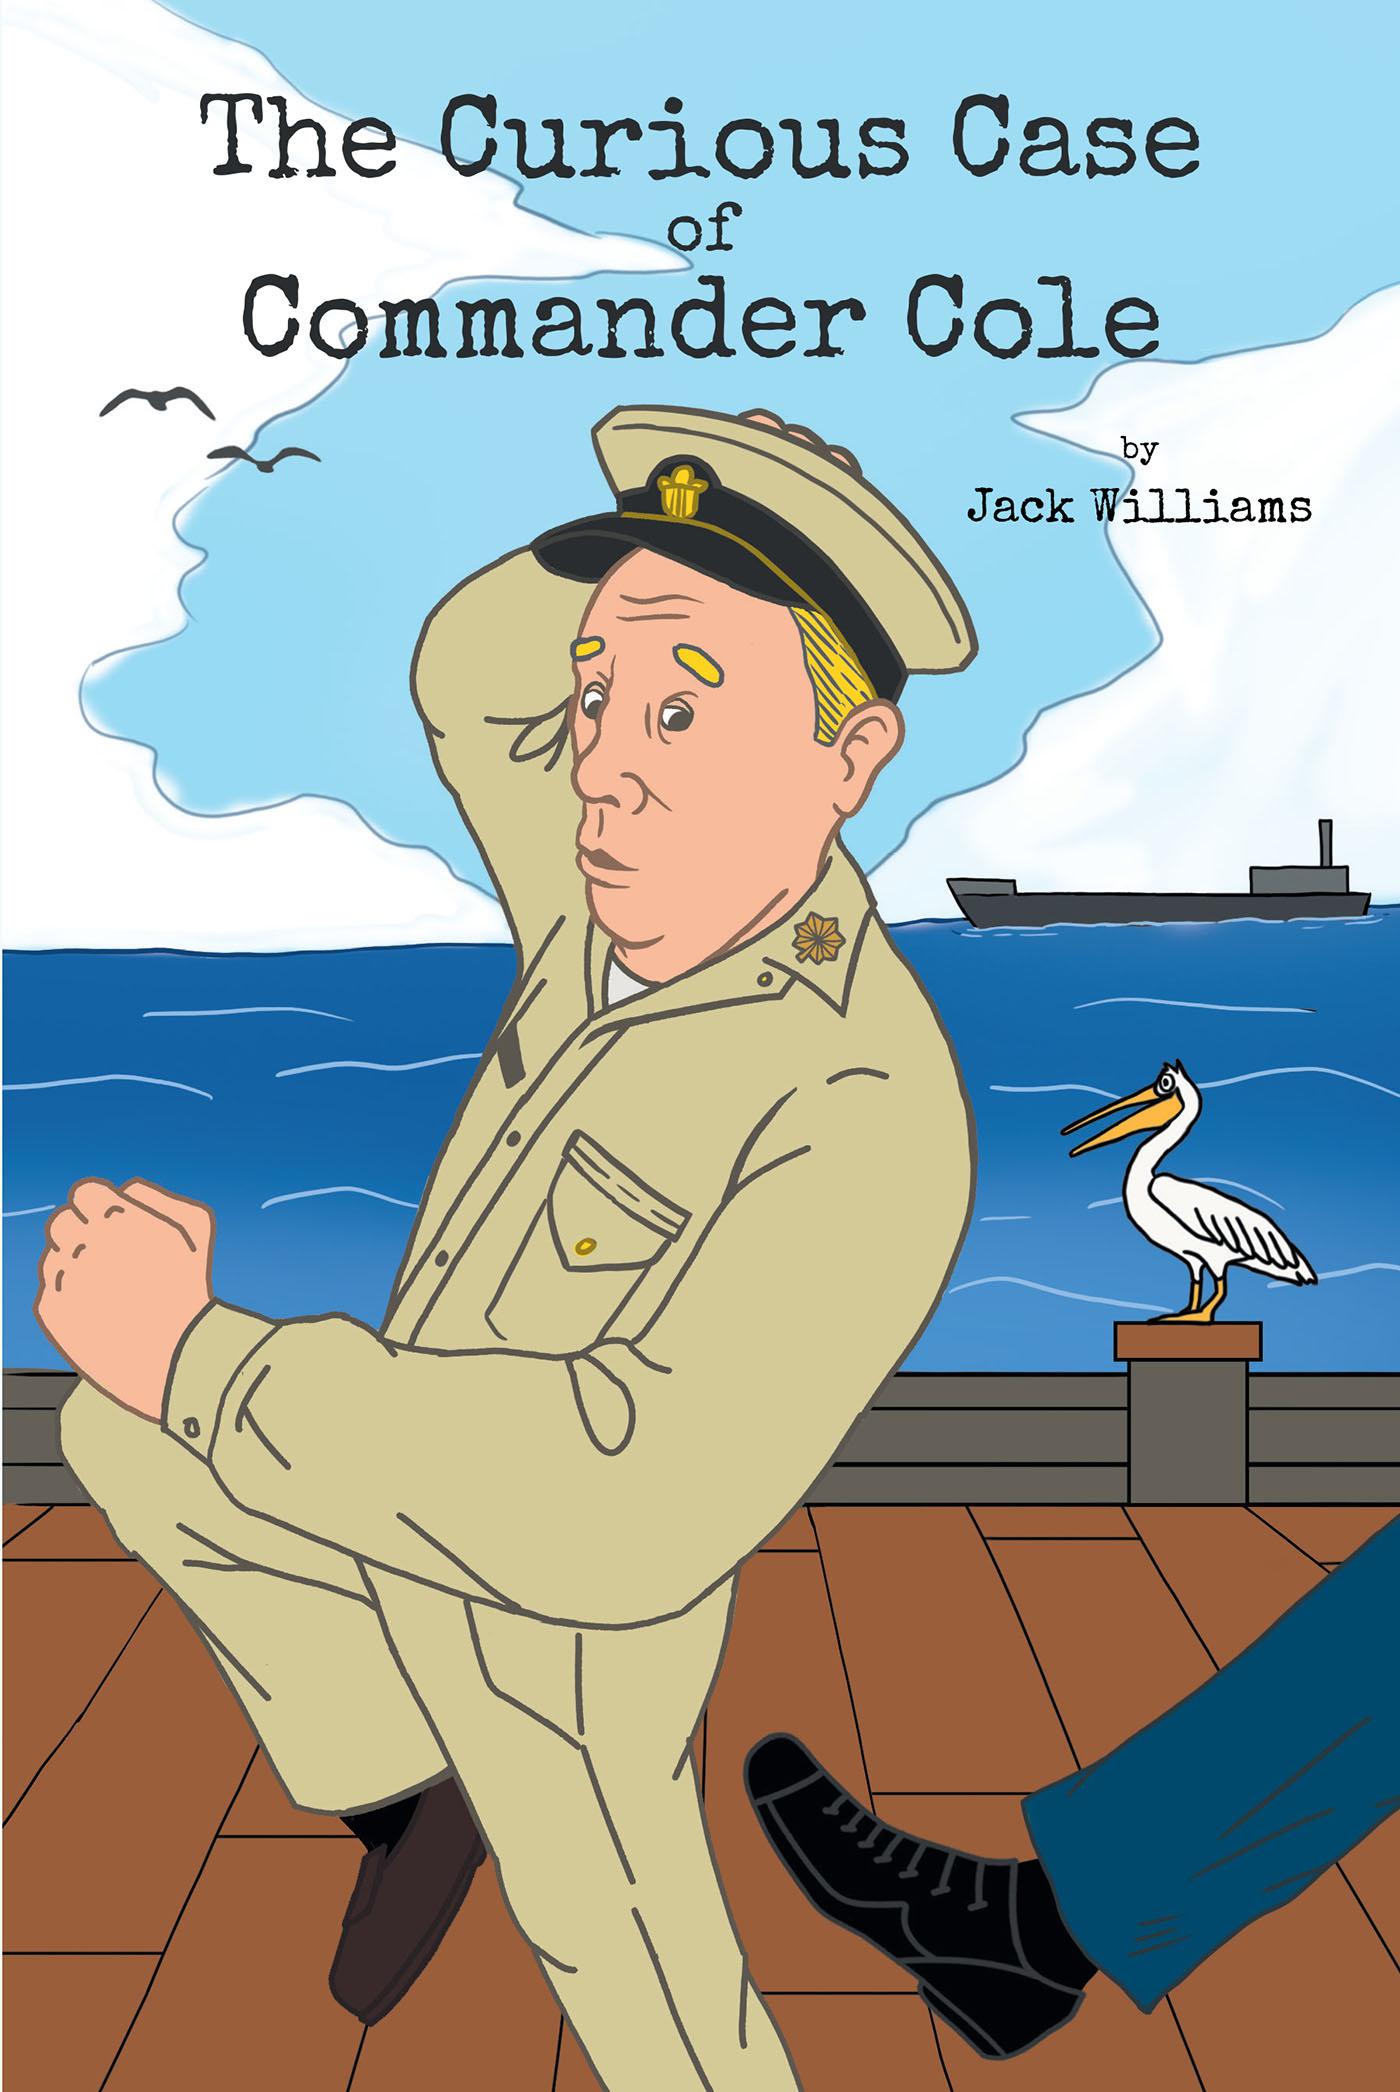 Author Jack Williams’s New Book, "The Curious Case of Commander Cole," is a Humorous Work of Historical Fiction That Takes Readers Back to World War II